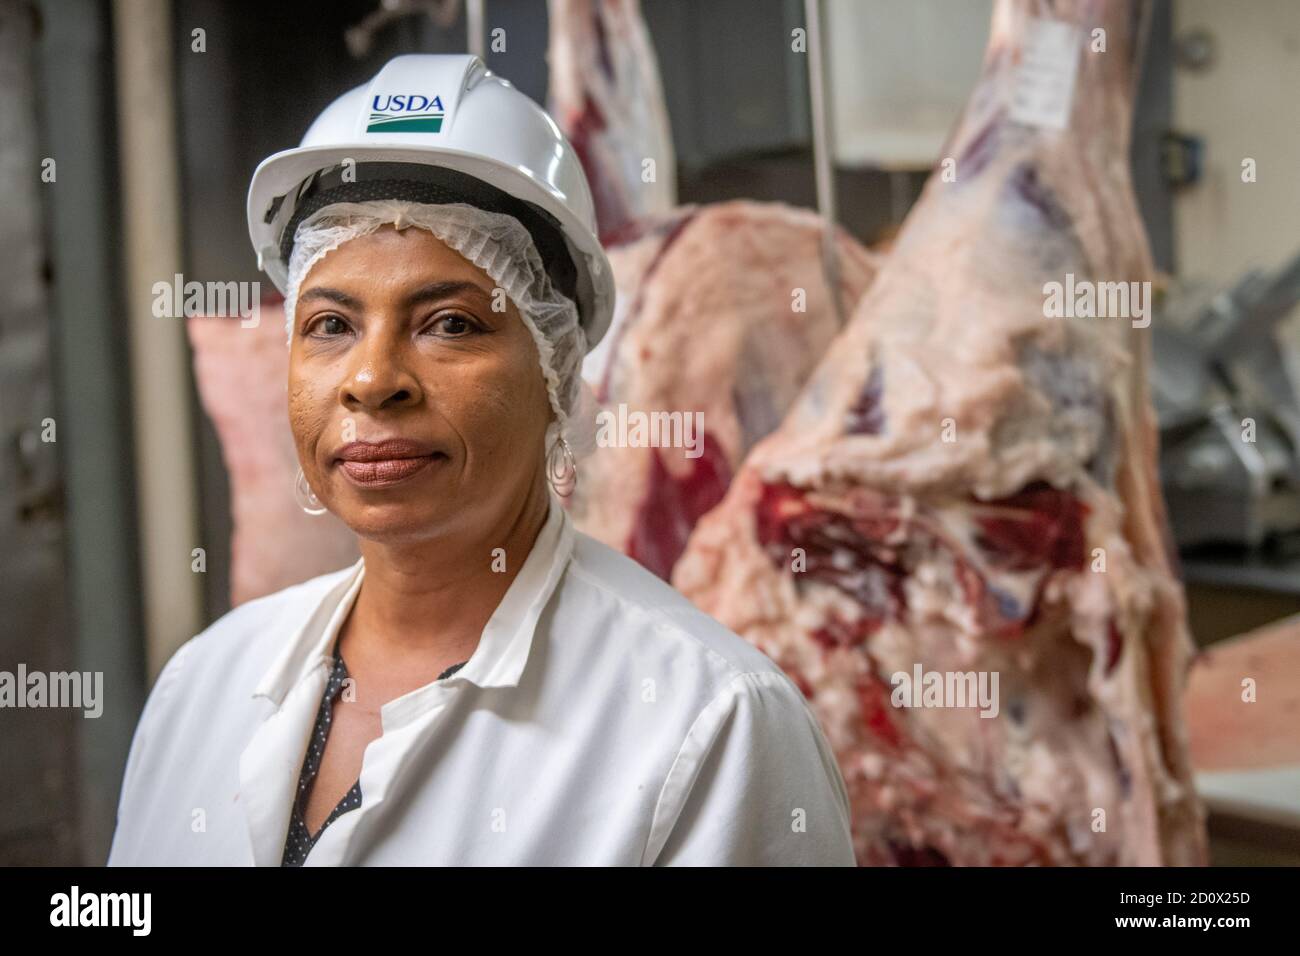 USDA Worker standing in front of cuts of meat, Sudlersville, MD Stock Photo